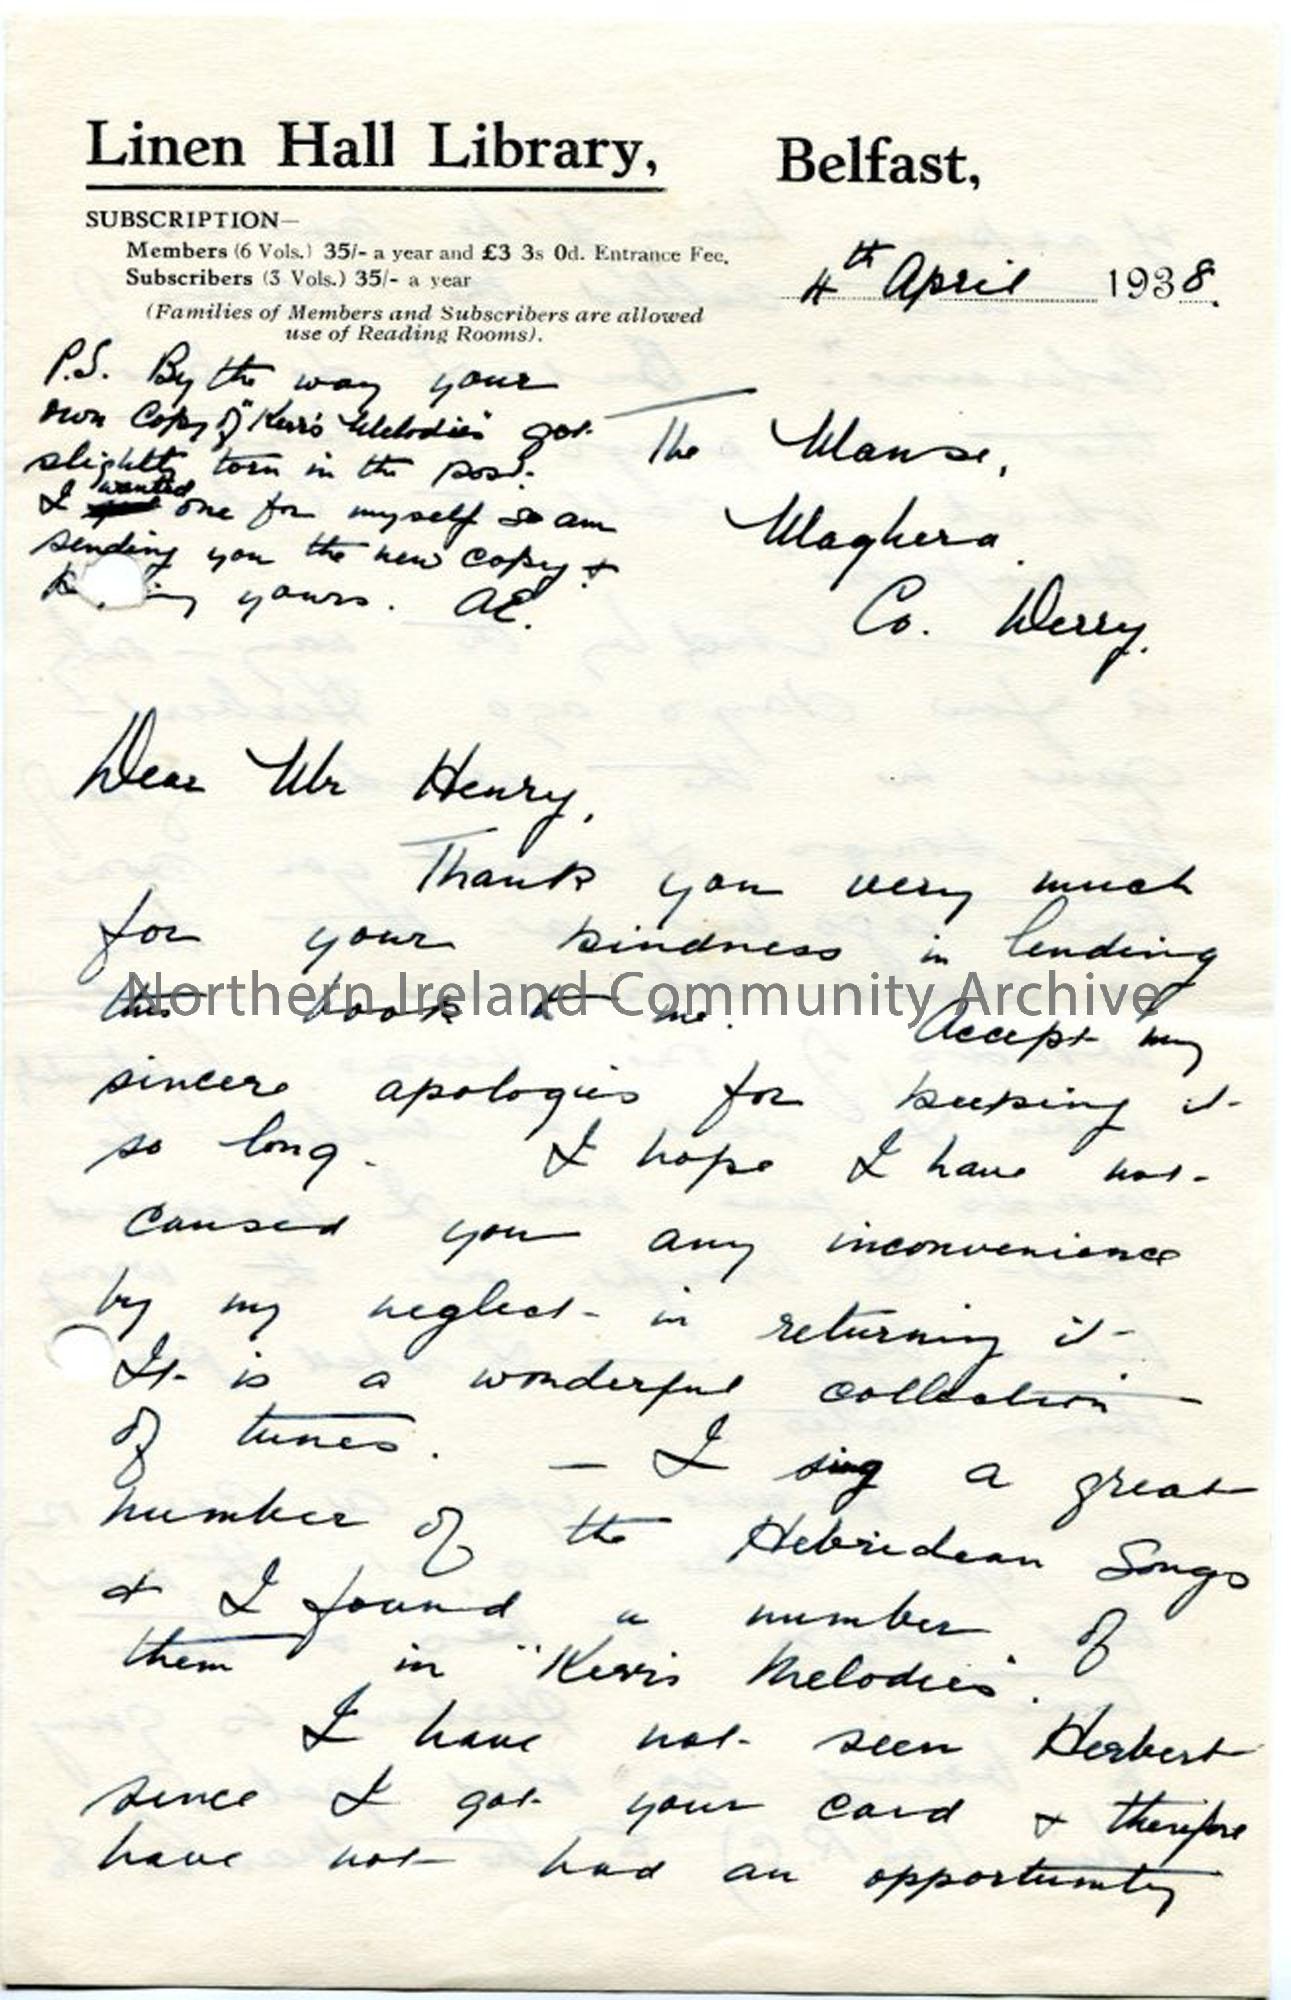 Page one: Letter from Anneen Esler, 4.4.1938